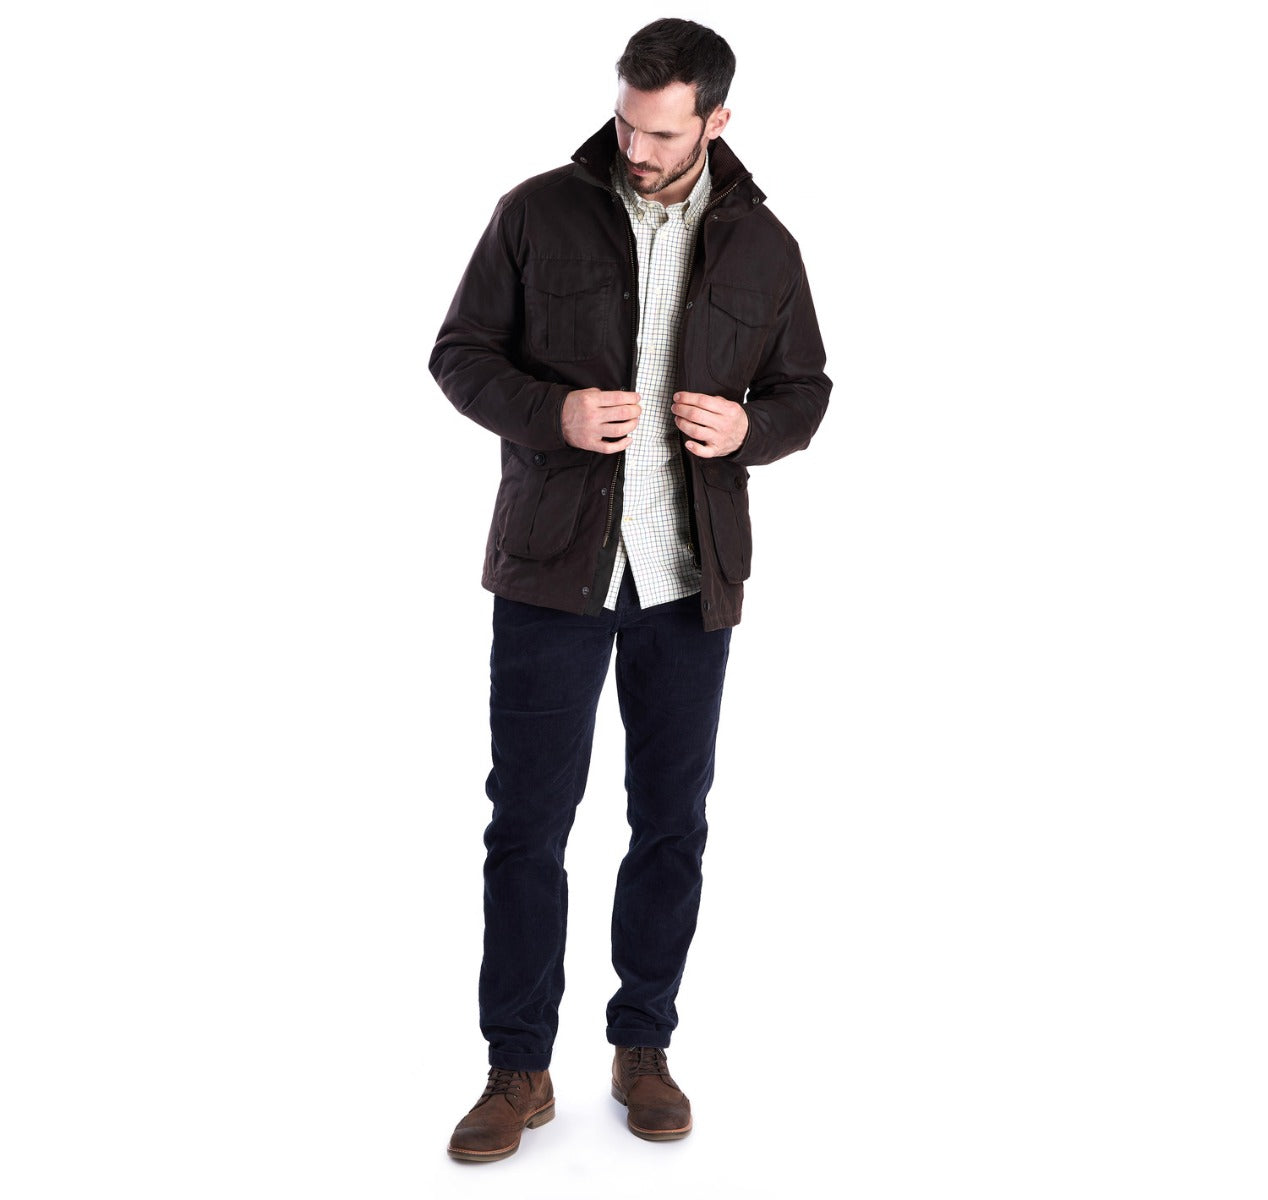 Barbour Latrigg Waxed Jacket